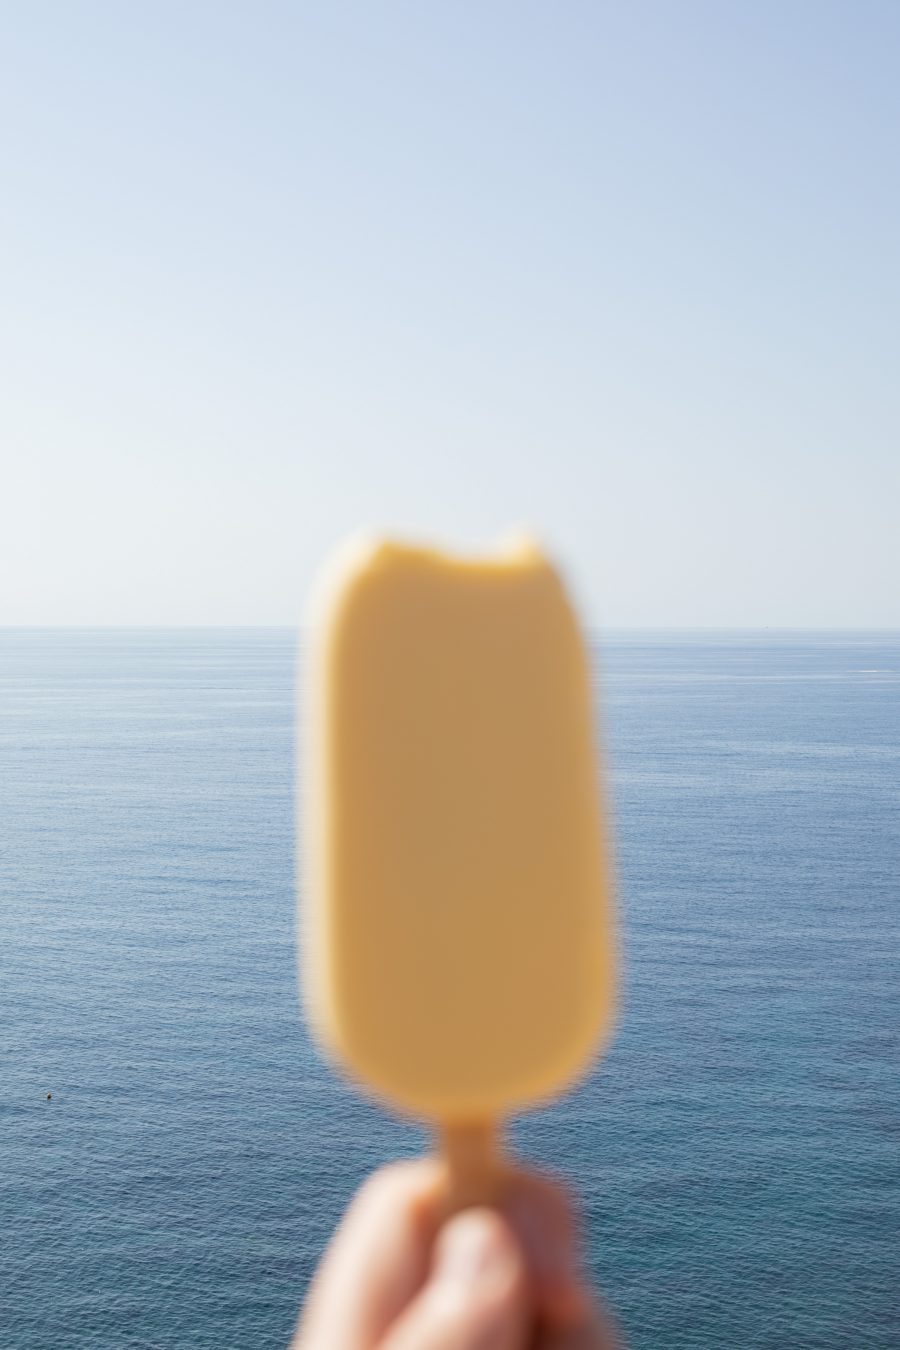 An ice cream popsicle held in front of the sea.